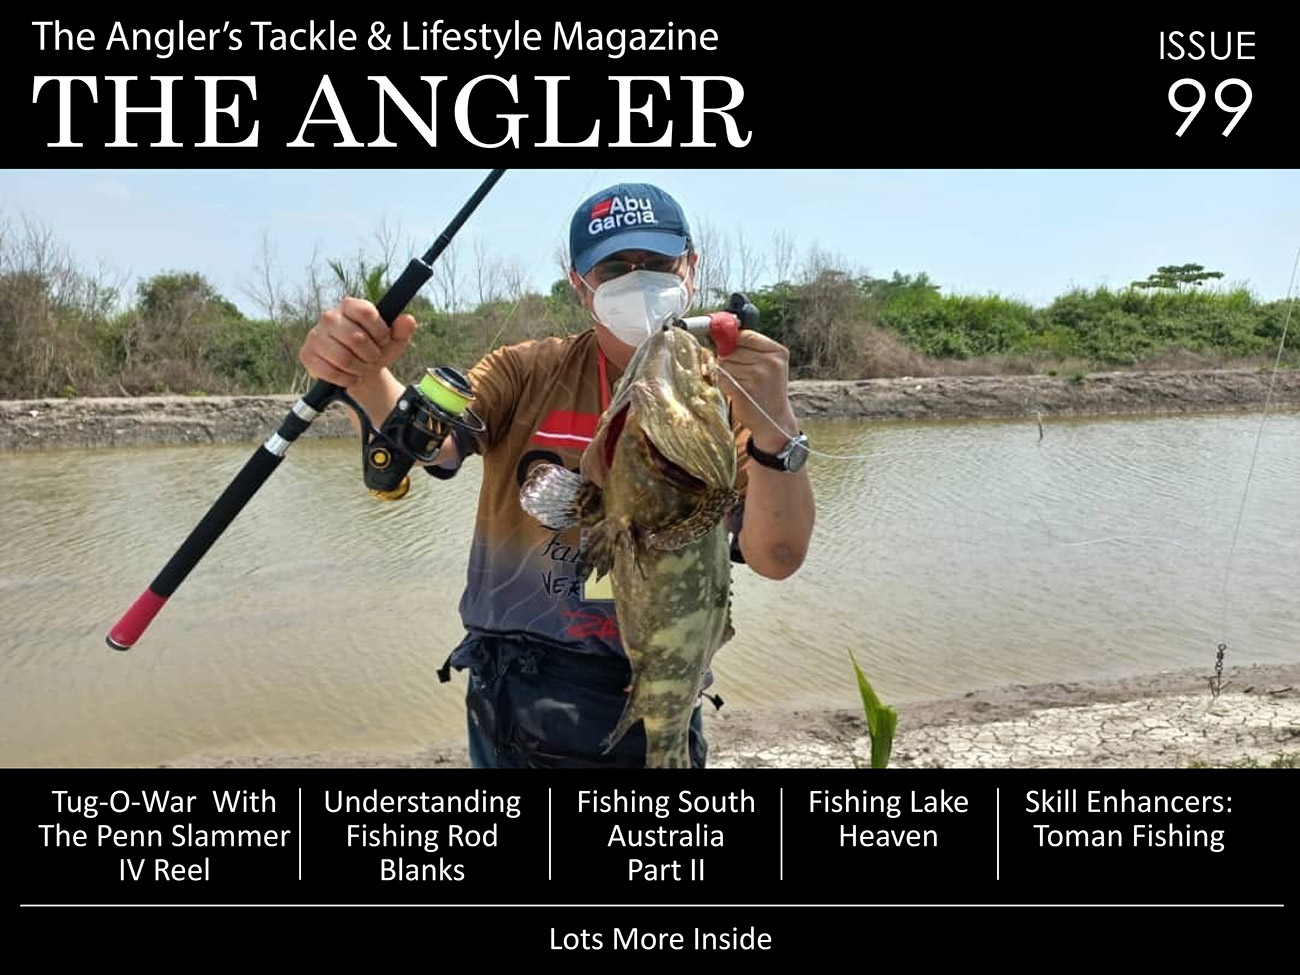 The Angler, The Angler Magazine, fishing magazine asia, where to fish in asia, Sports Fishing Asia, Sportsfishing Asia, Fishing in Malaysia, where to fish in Malaysia, where to fish in Singapore, where to fish in Australia, fishing information Asia, fishing information Malaysia, fishing spots Asia, fishing tips Malaysia